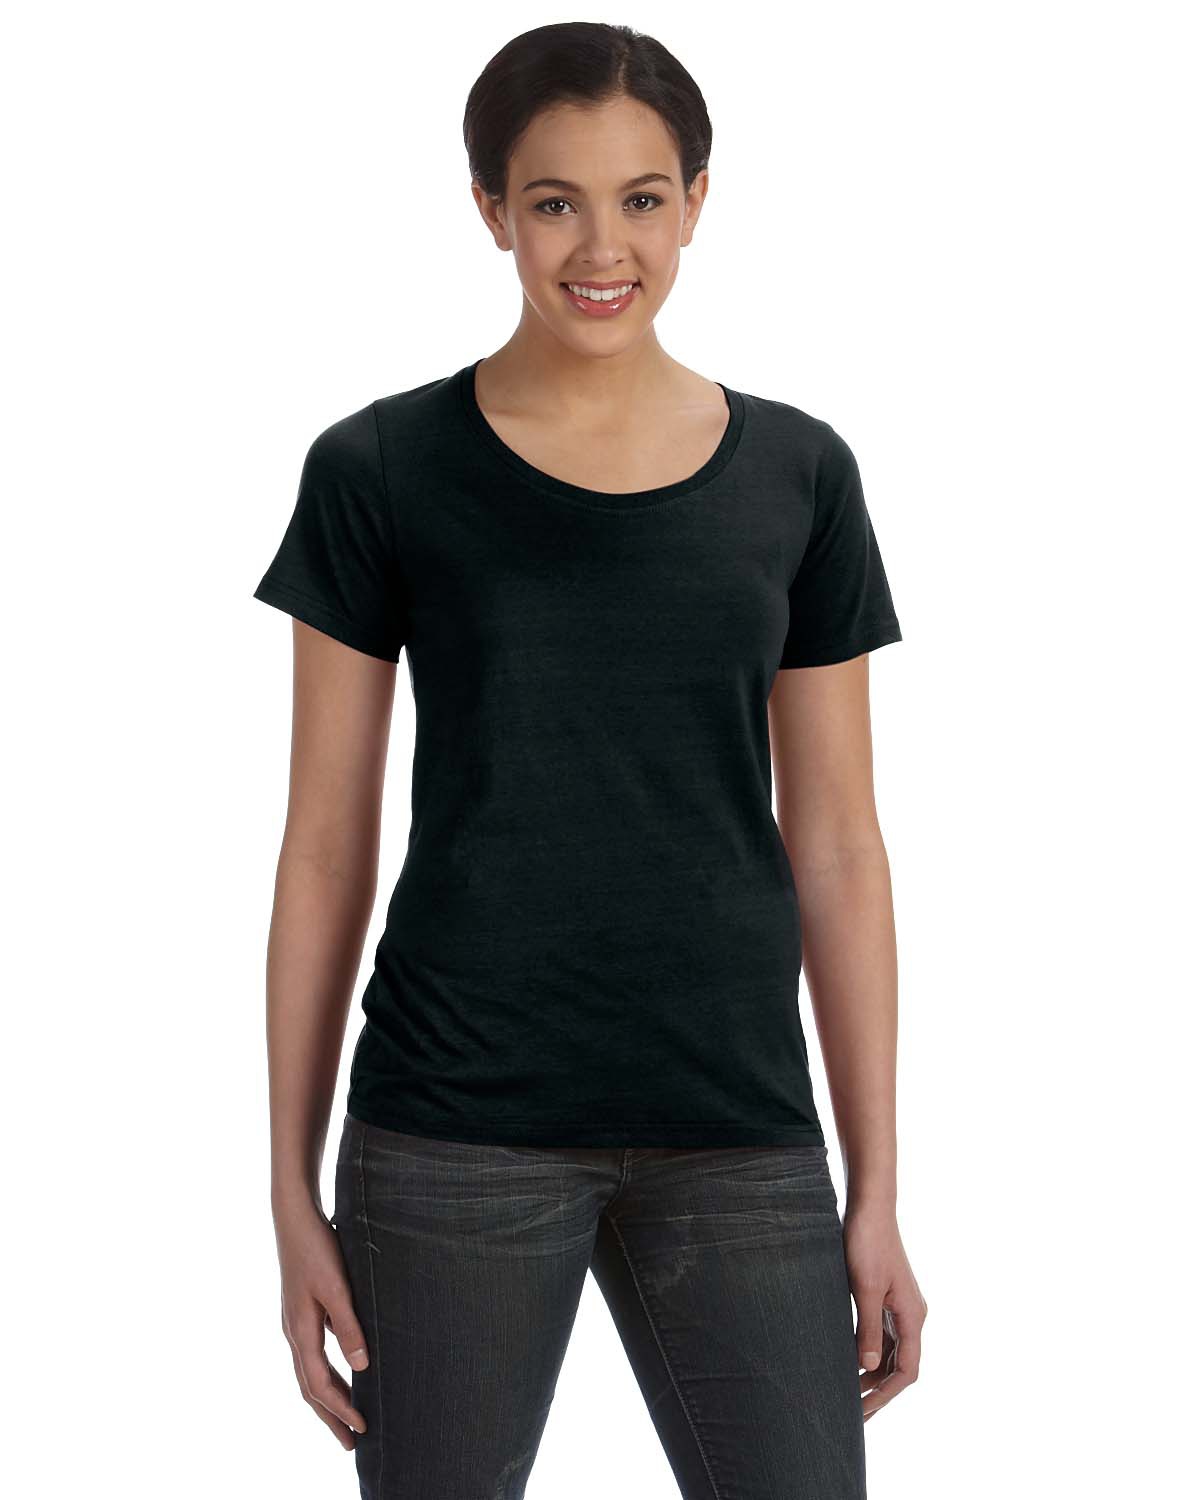 'Anvil 391A Ladies Featherweight Scoop T-Shirt'